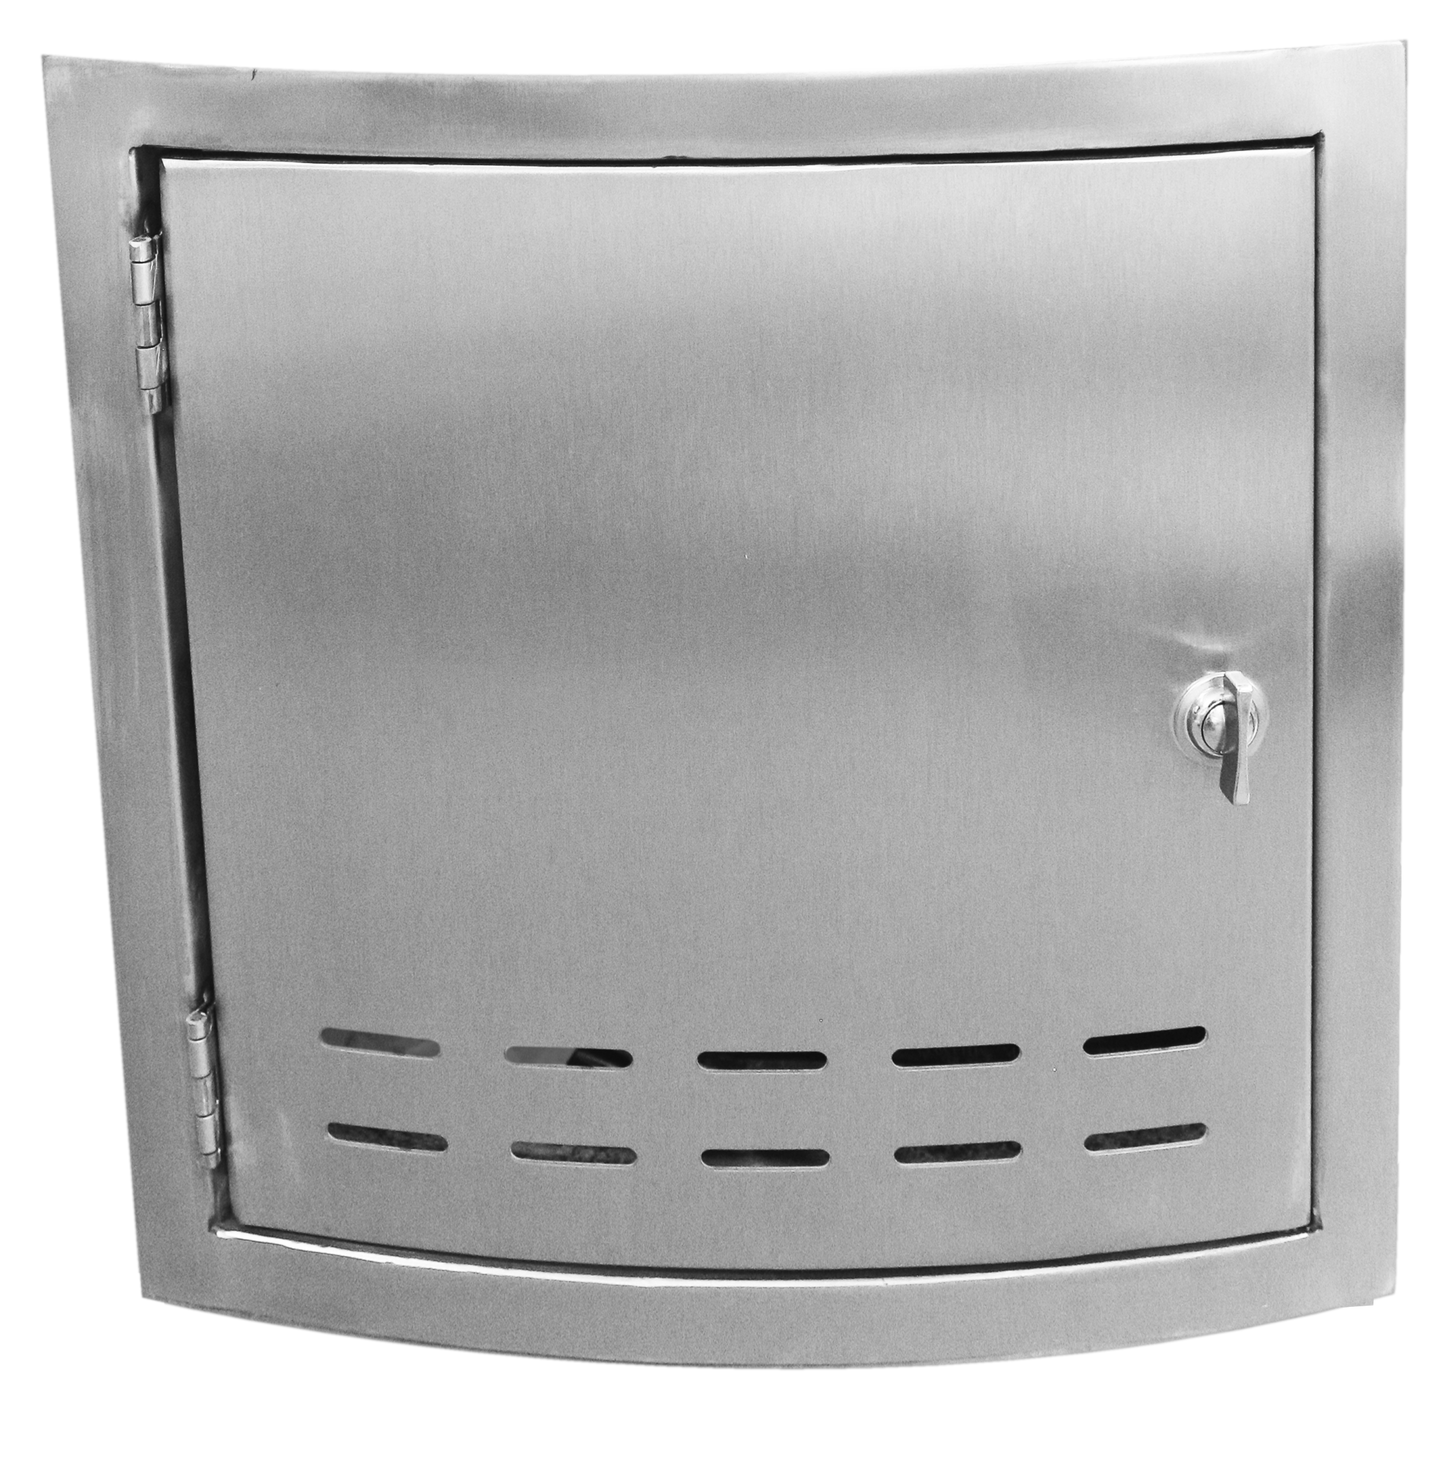 The Outdoor Plus 14" x 17" Stainless Steel Access Door for 20lb. Propane Tank